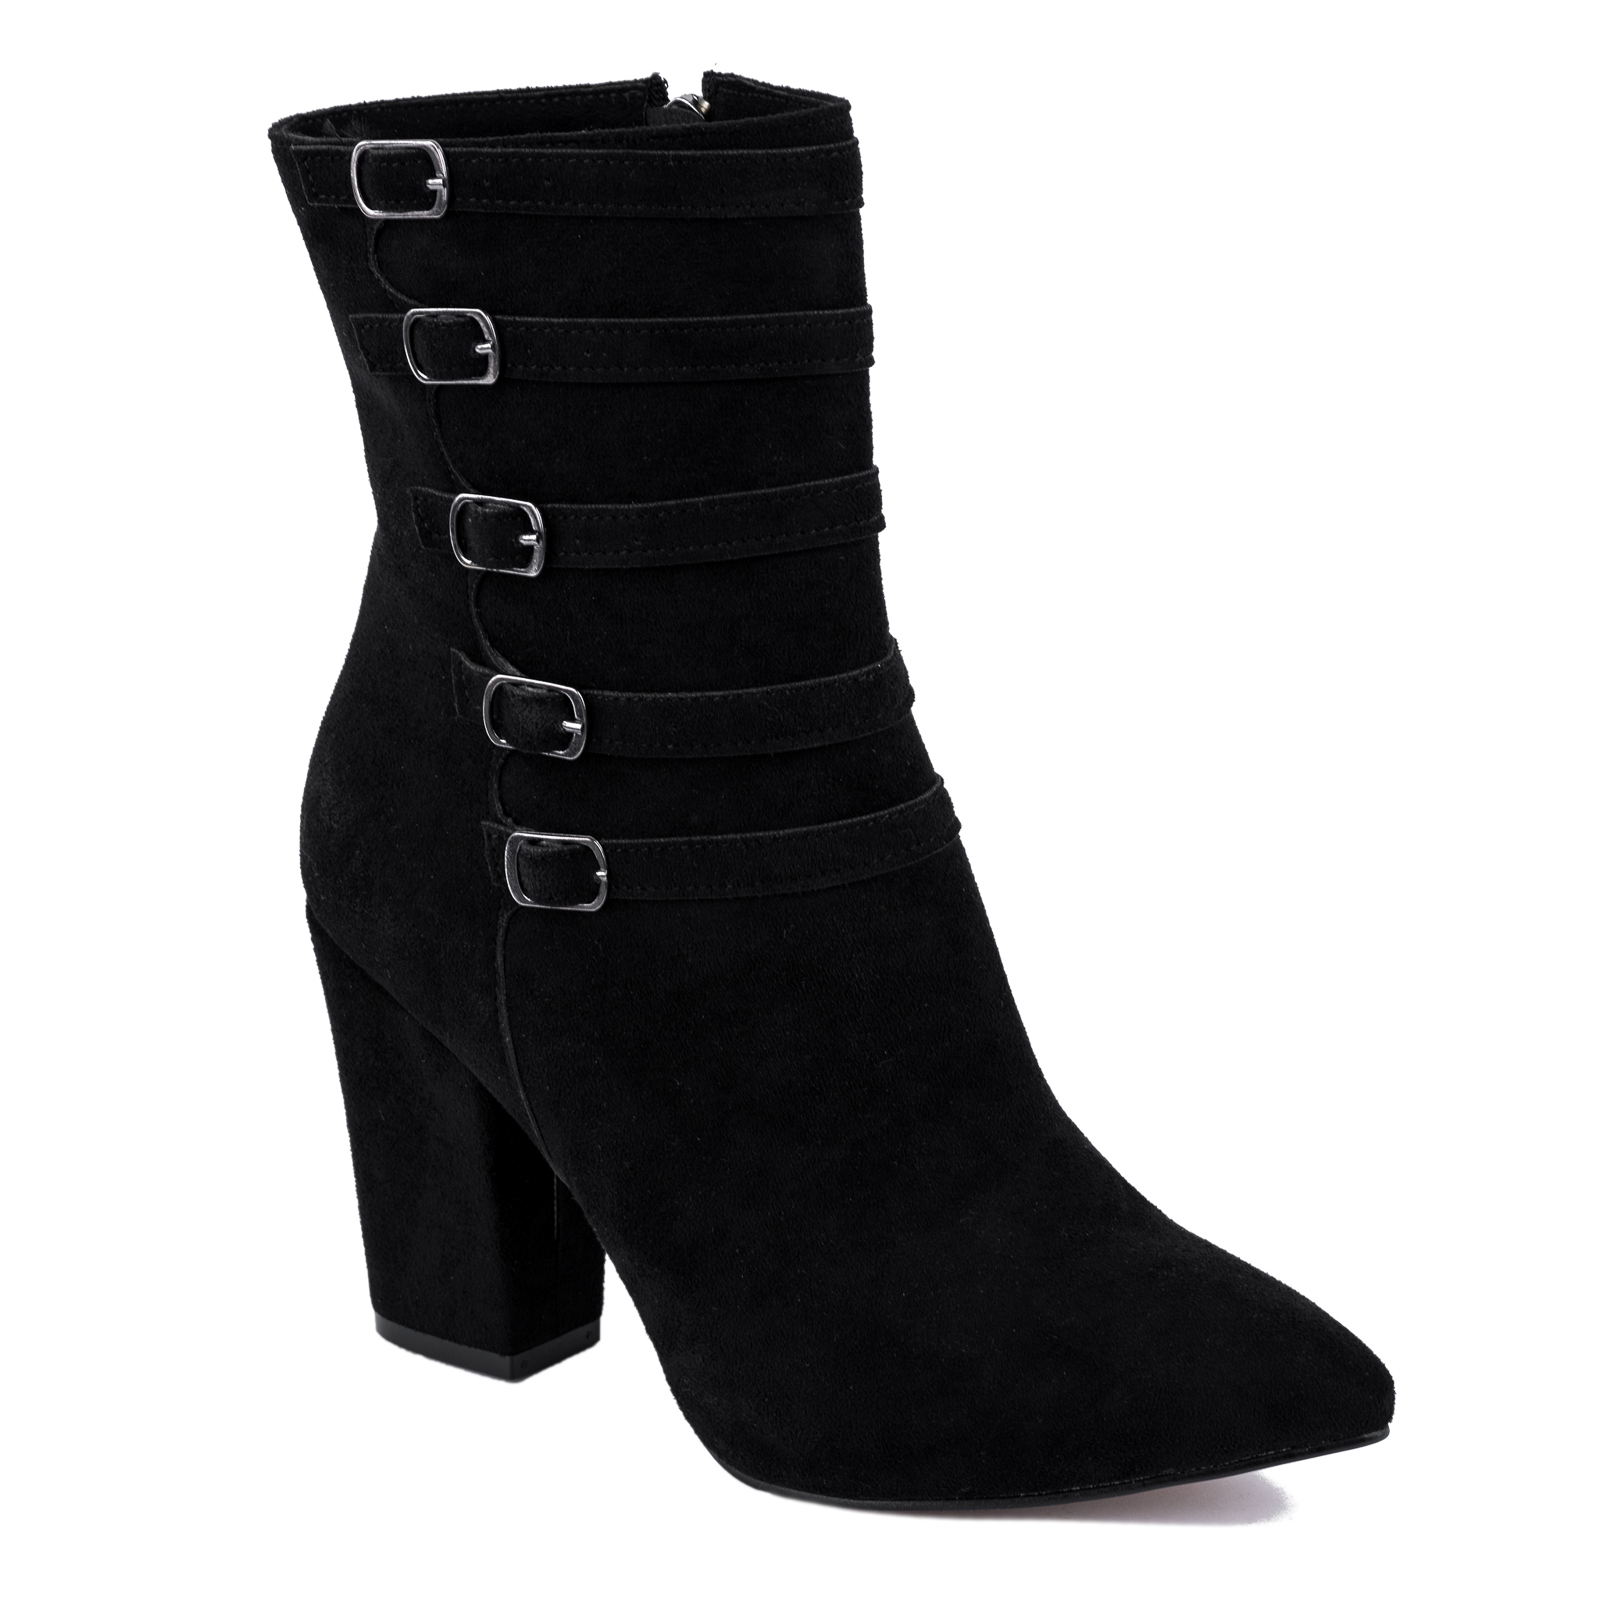 VELOUR ANKLE BOOTS WITH BELTS AND BLOCK HEEL - BLACK